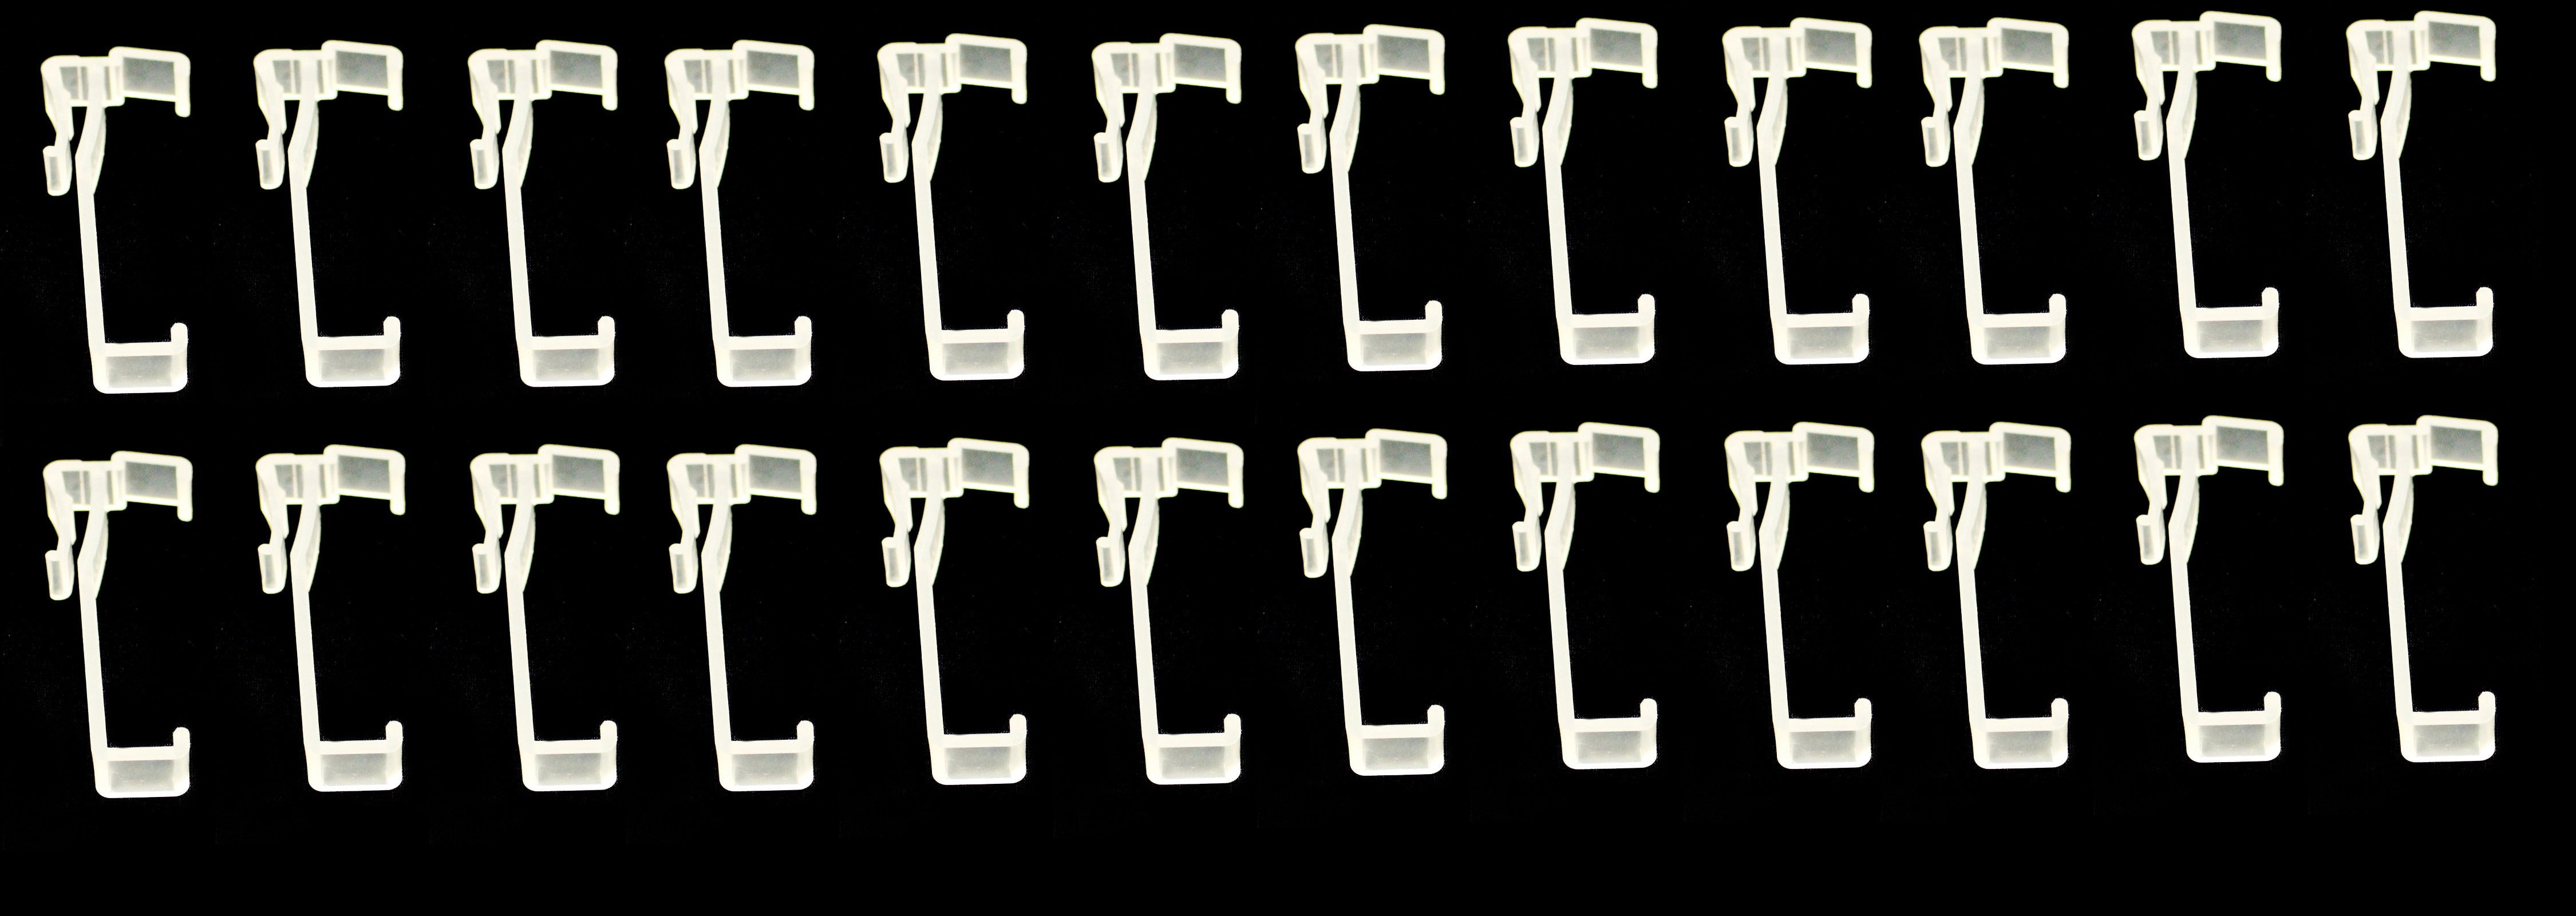 3 Inch Valance Clips for Window Blinds - Pick your Quantity - 24 Pack